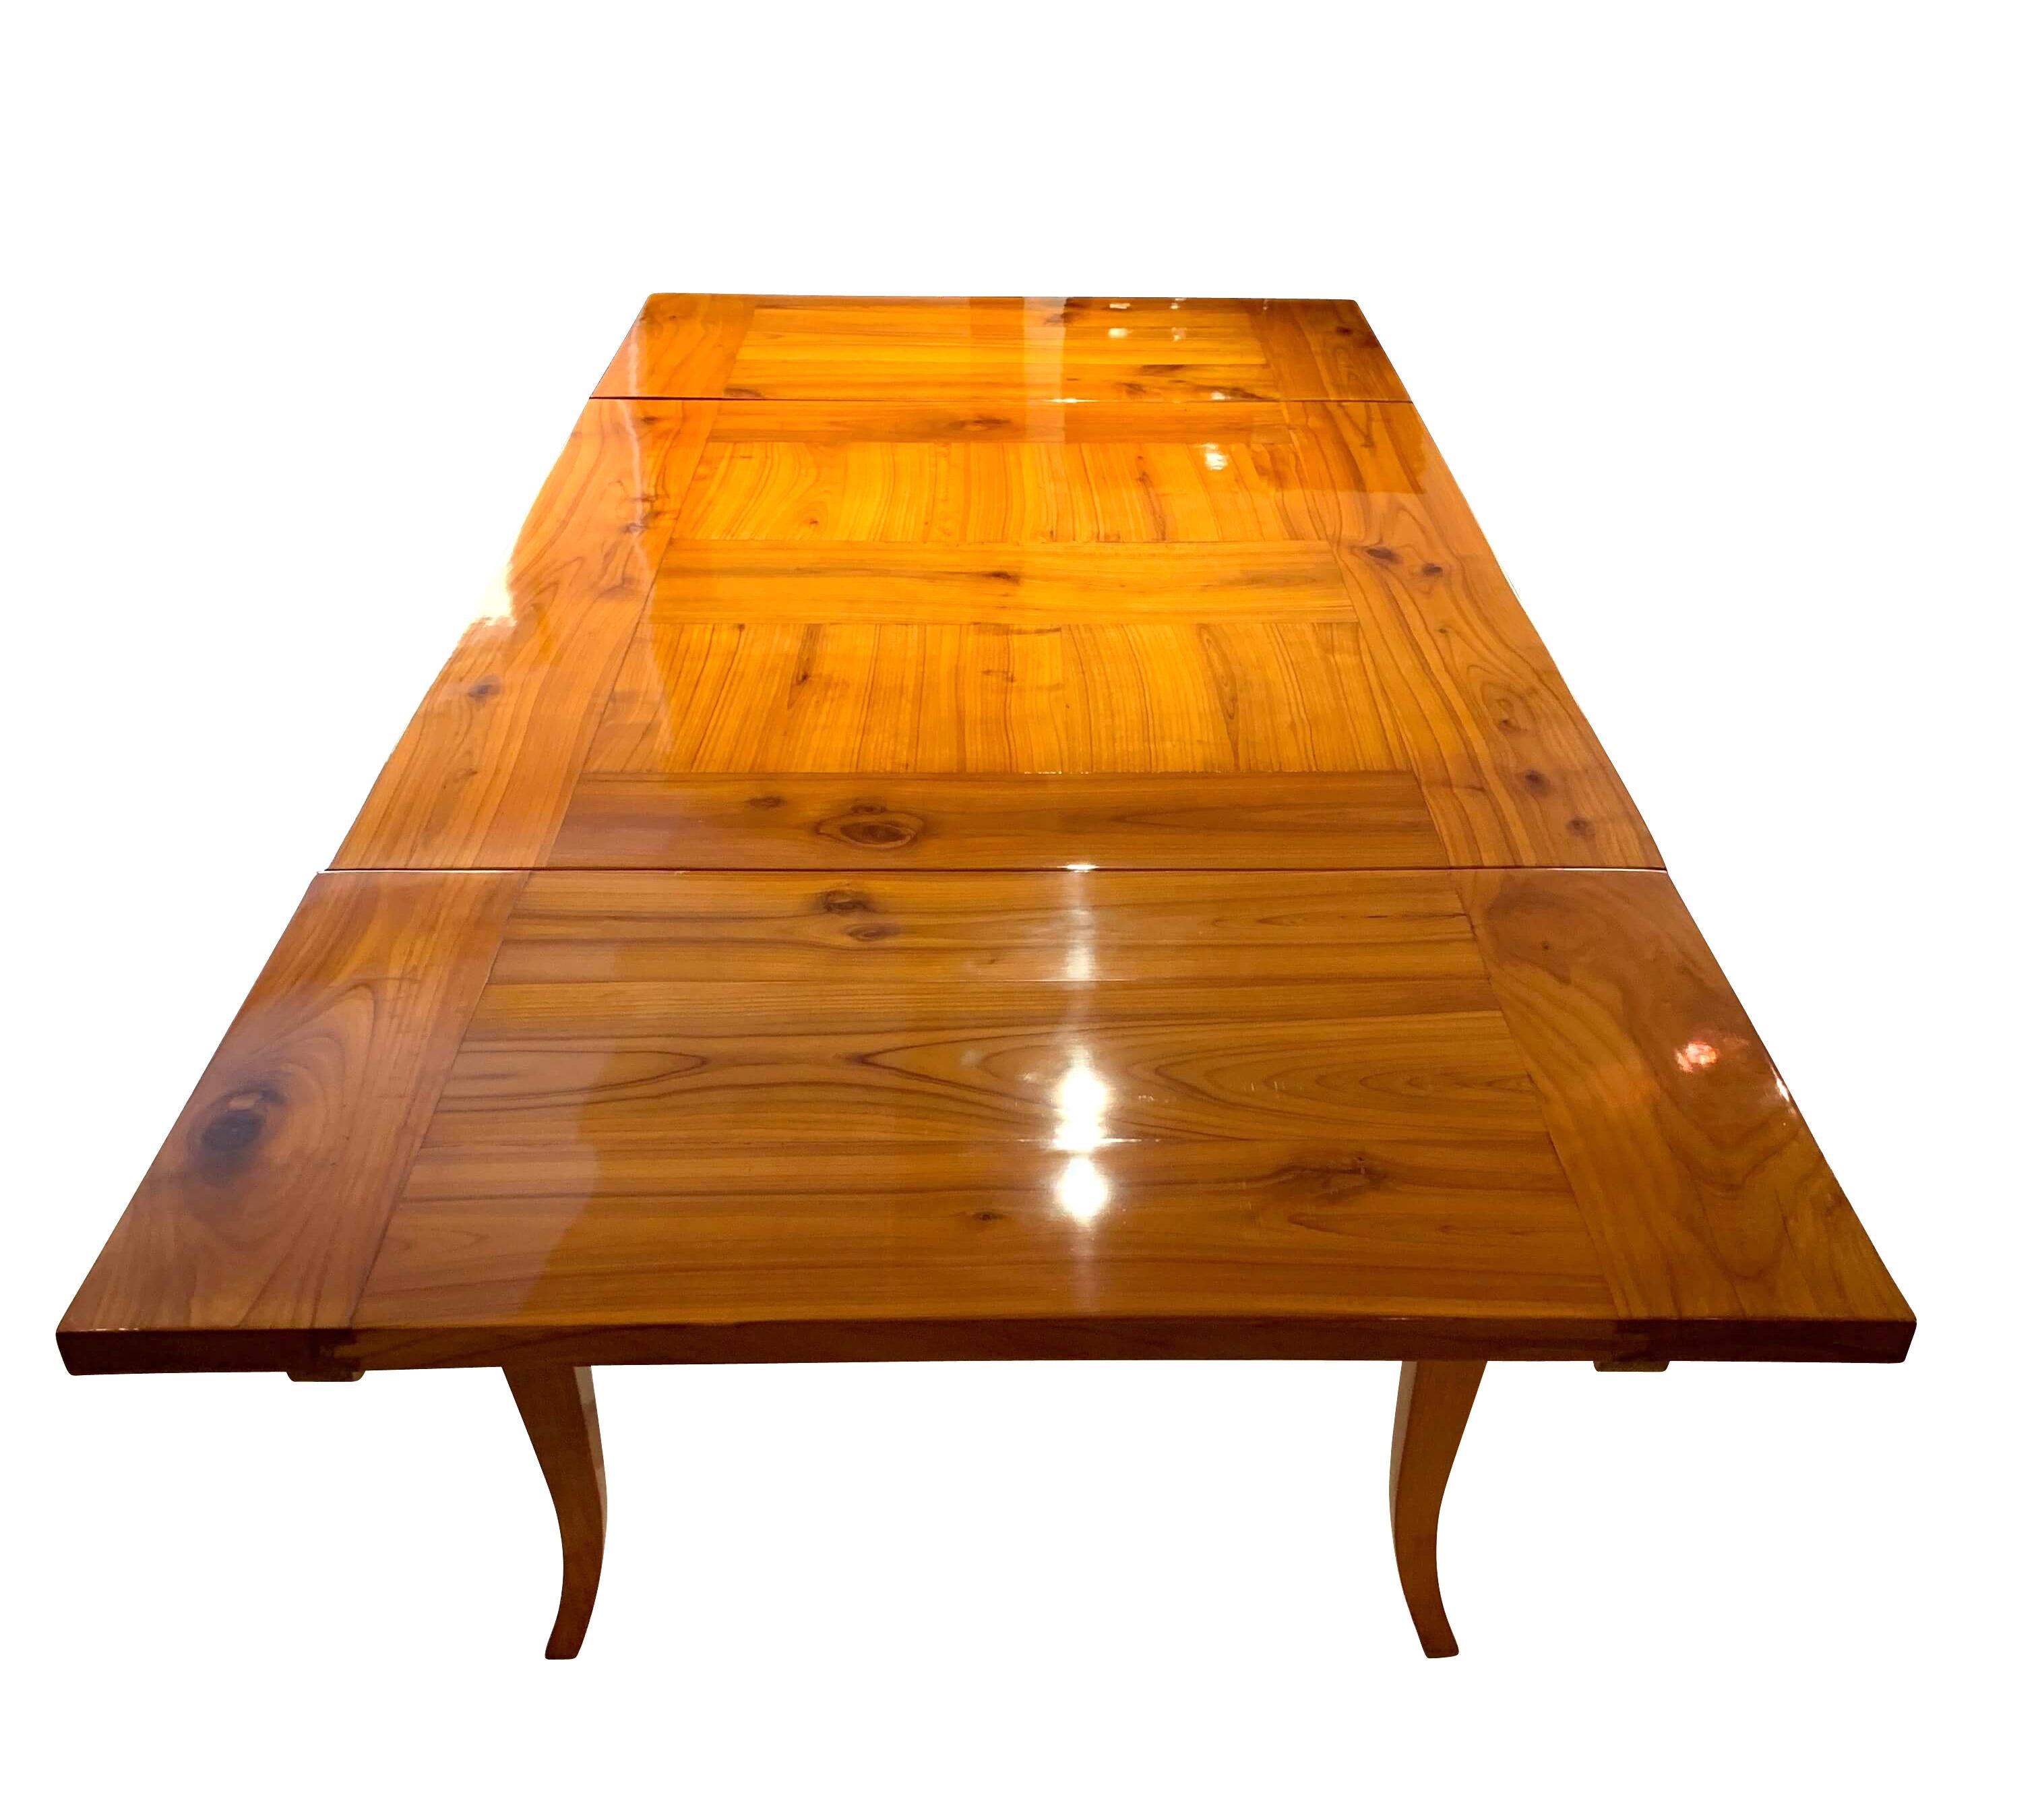 Early 19th Century Expandable Biedermeier Table, Cherry Massive, South Germany, circa 1820